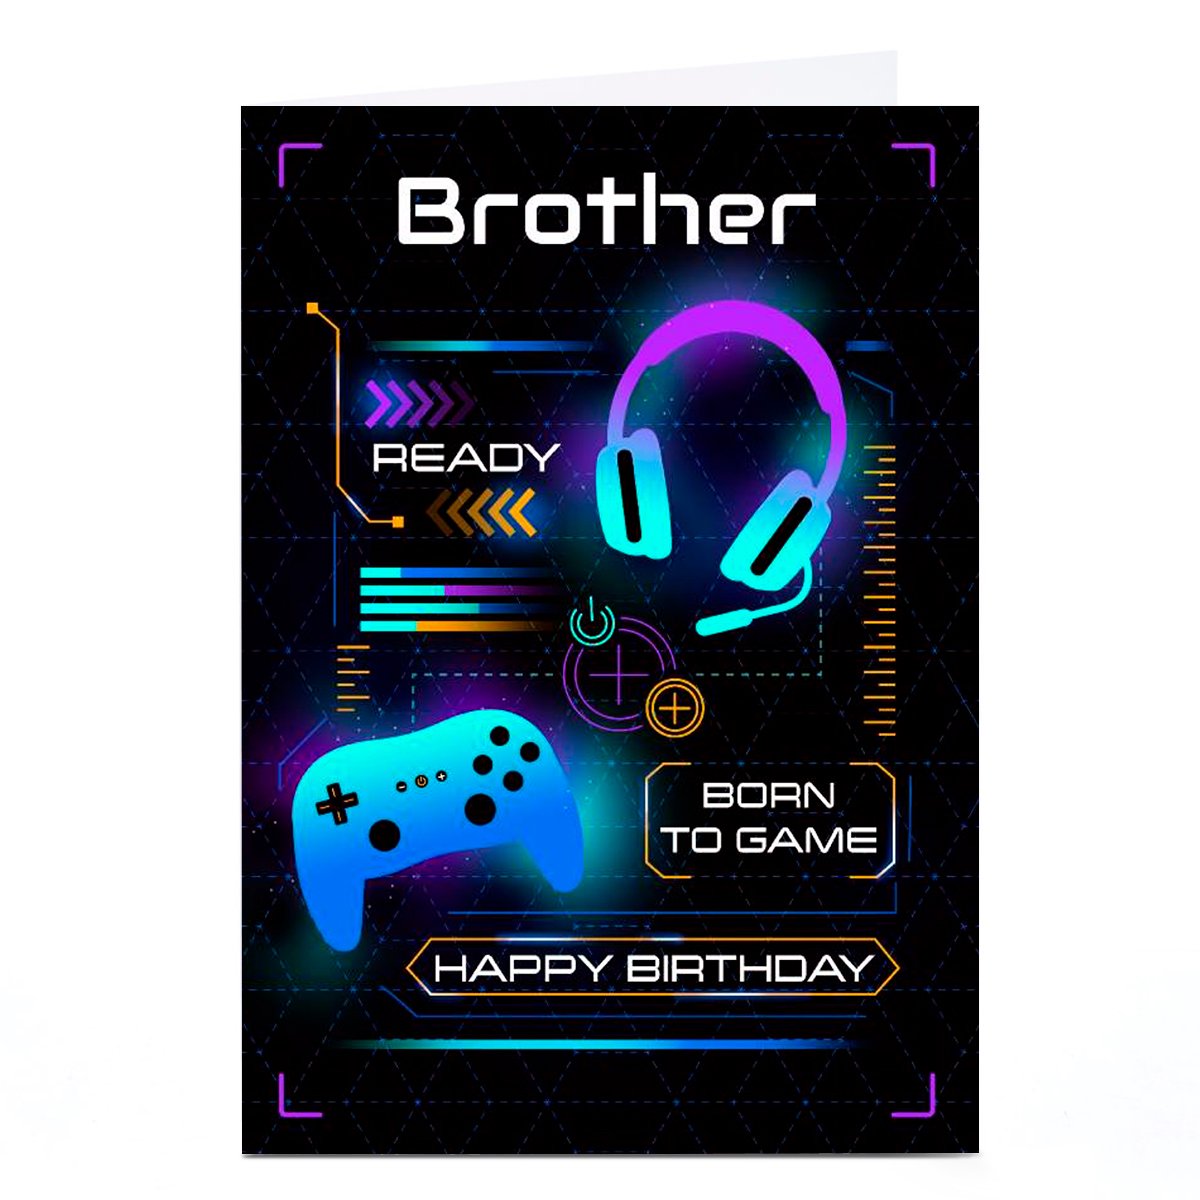 Personalised Birthday Card - Born To Game, Brother